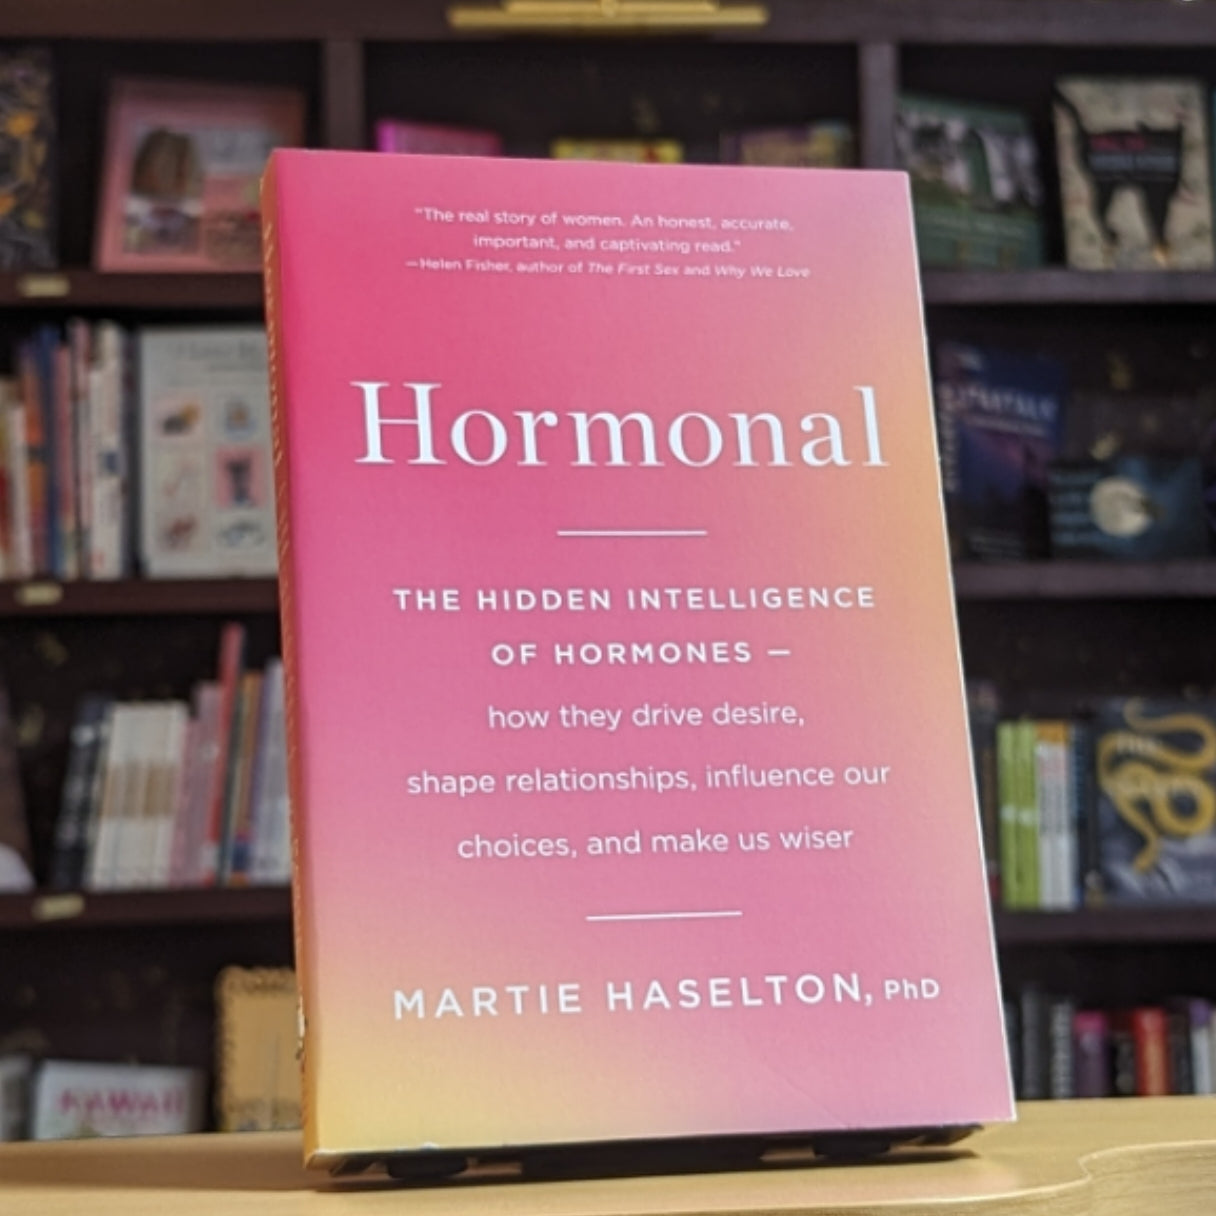 Hormonal: The Hidden Intelligence of Hormones -- How They Drive Desire, Shape Relationships, Influence Our Choices, and Make Us Wiser